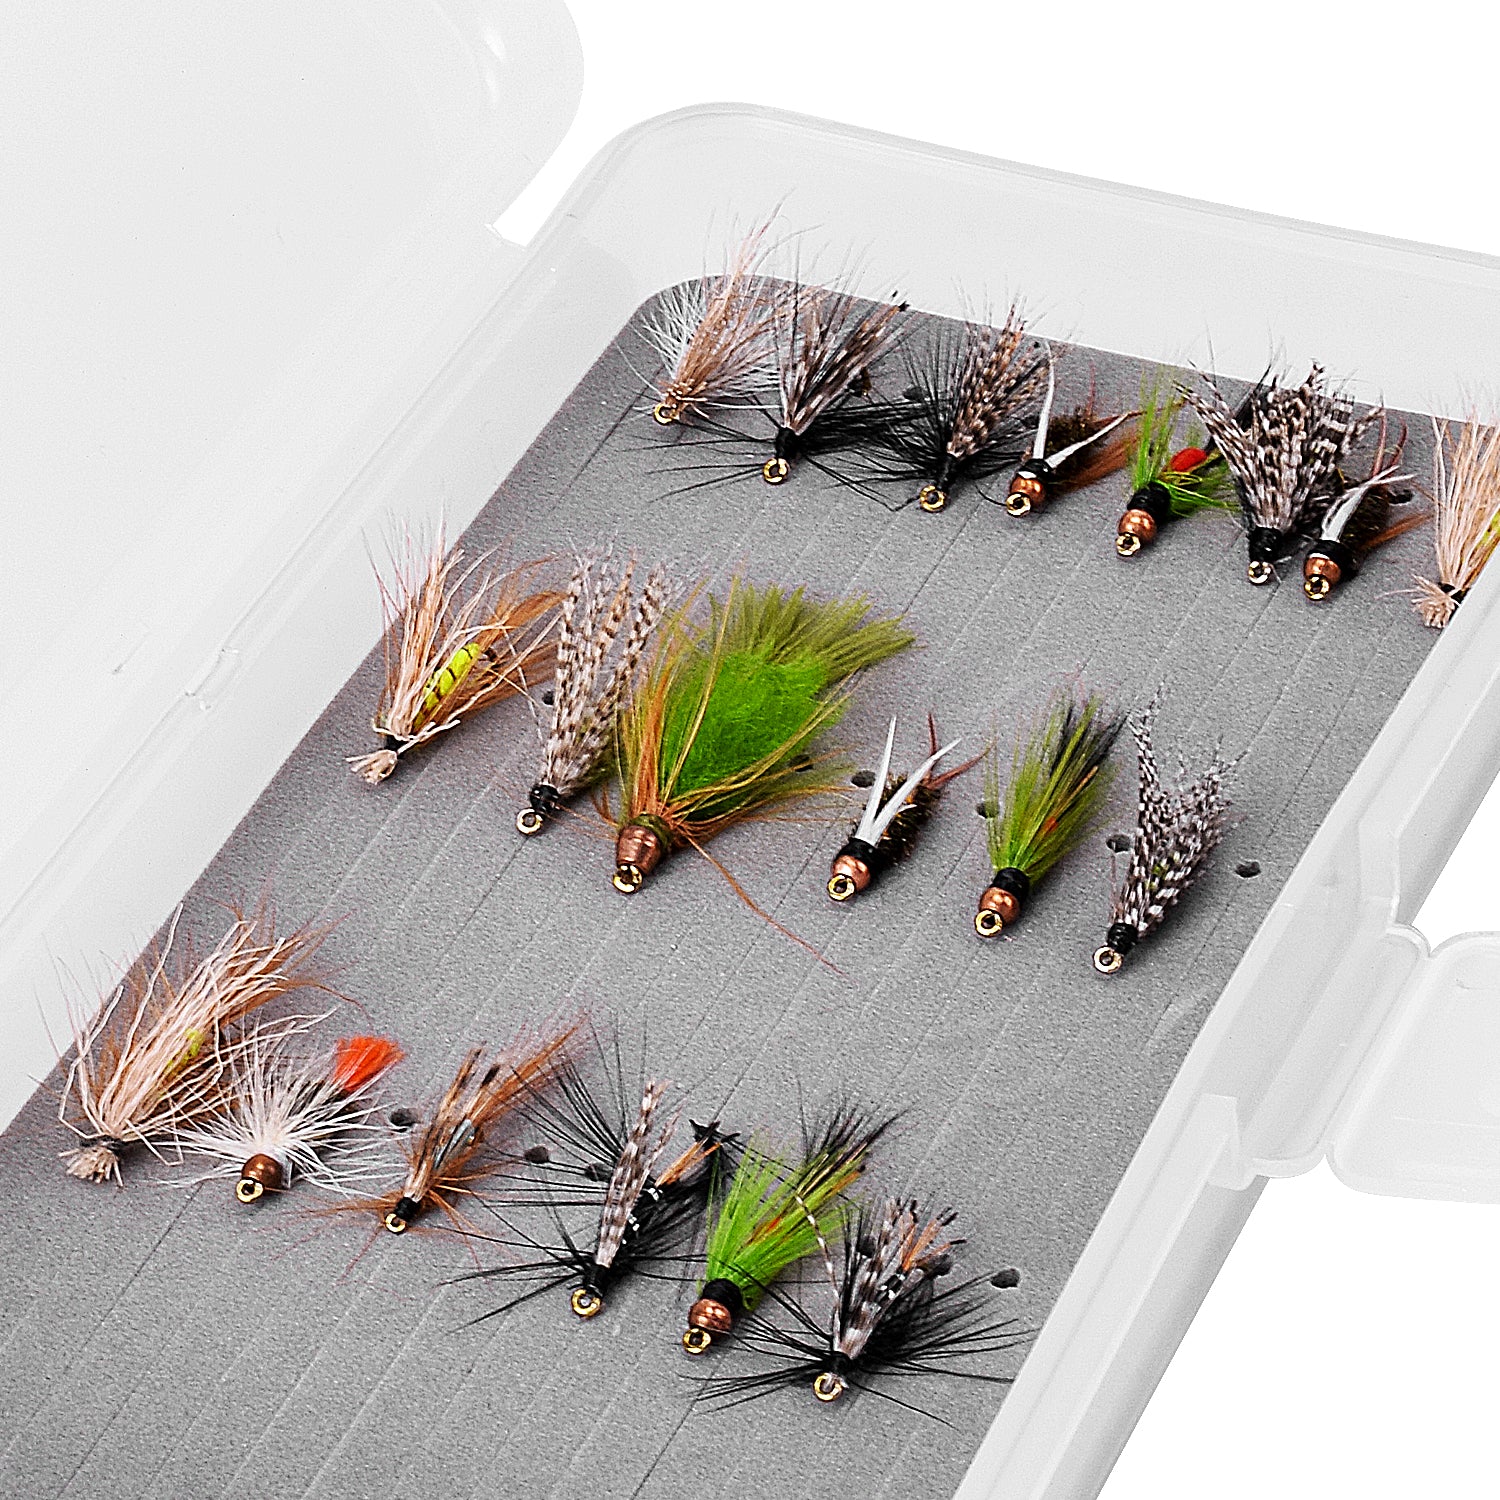 BestCity Fly Fishing EGG FLIES Megapack FREE Fly Box For Trout